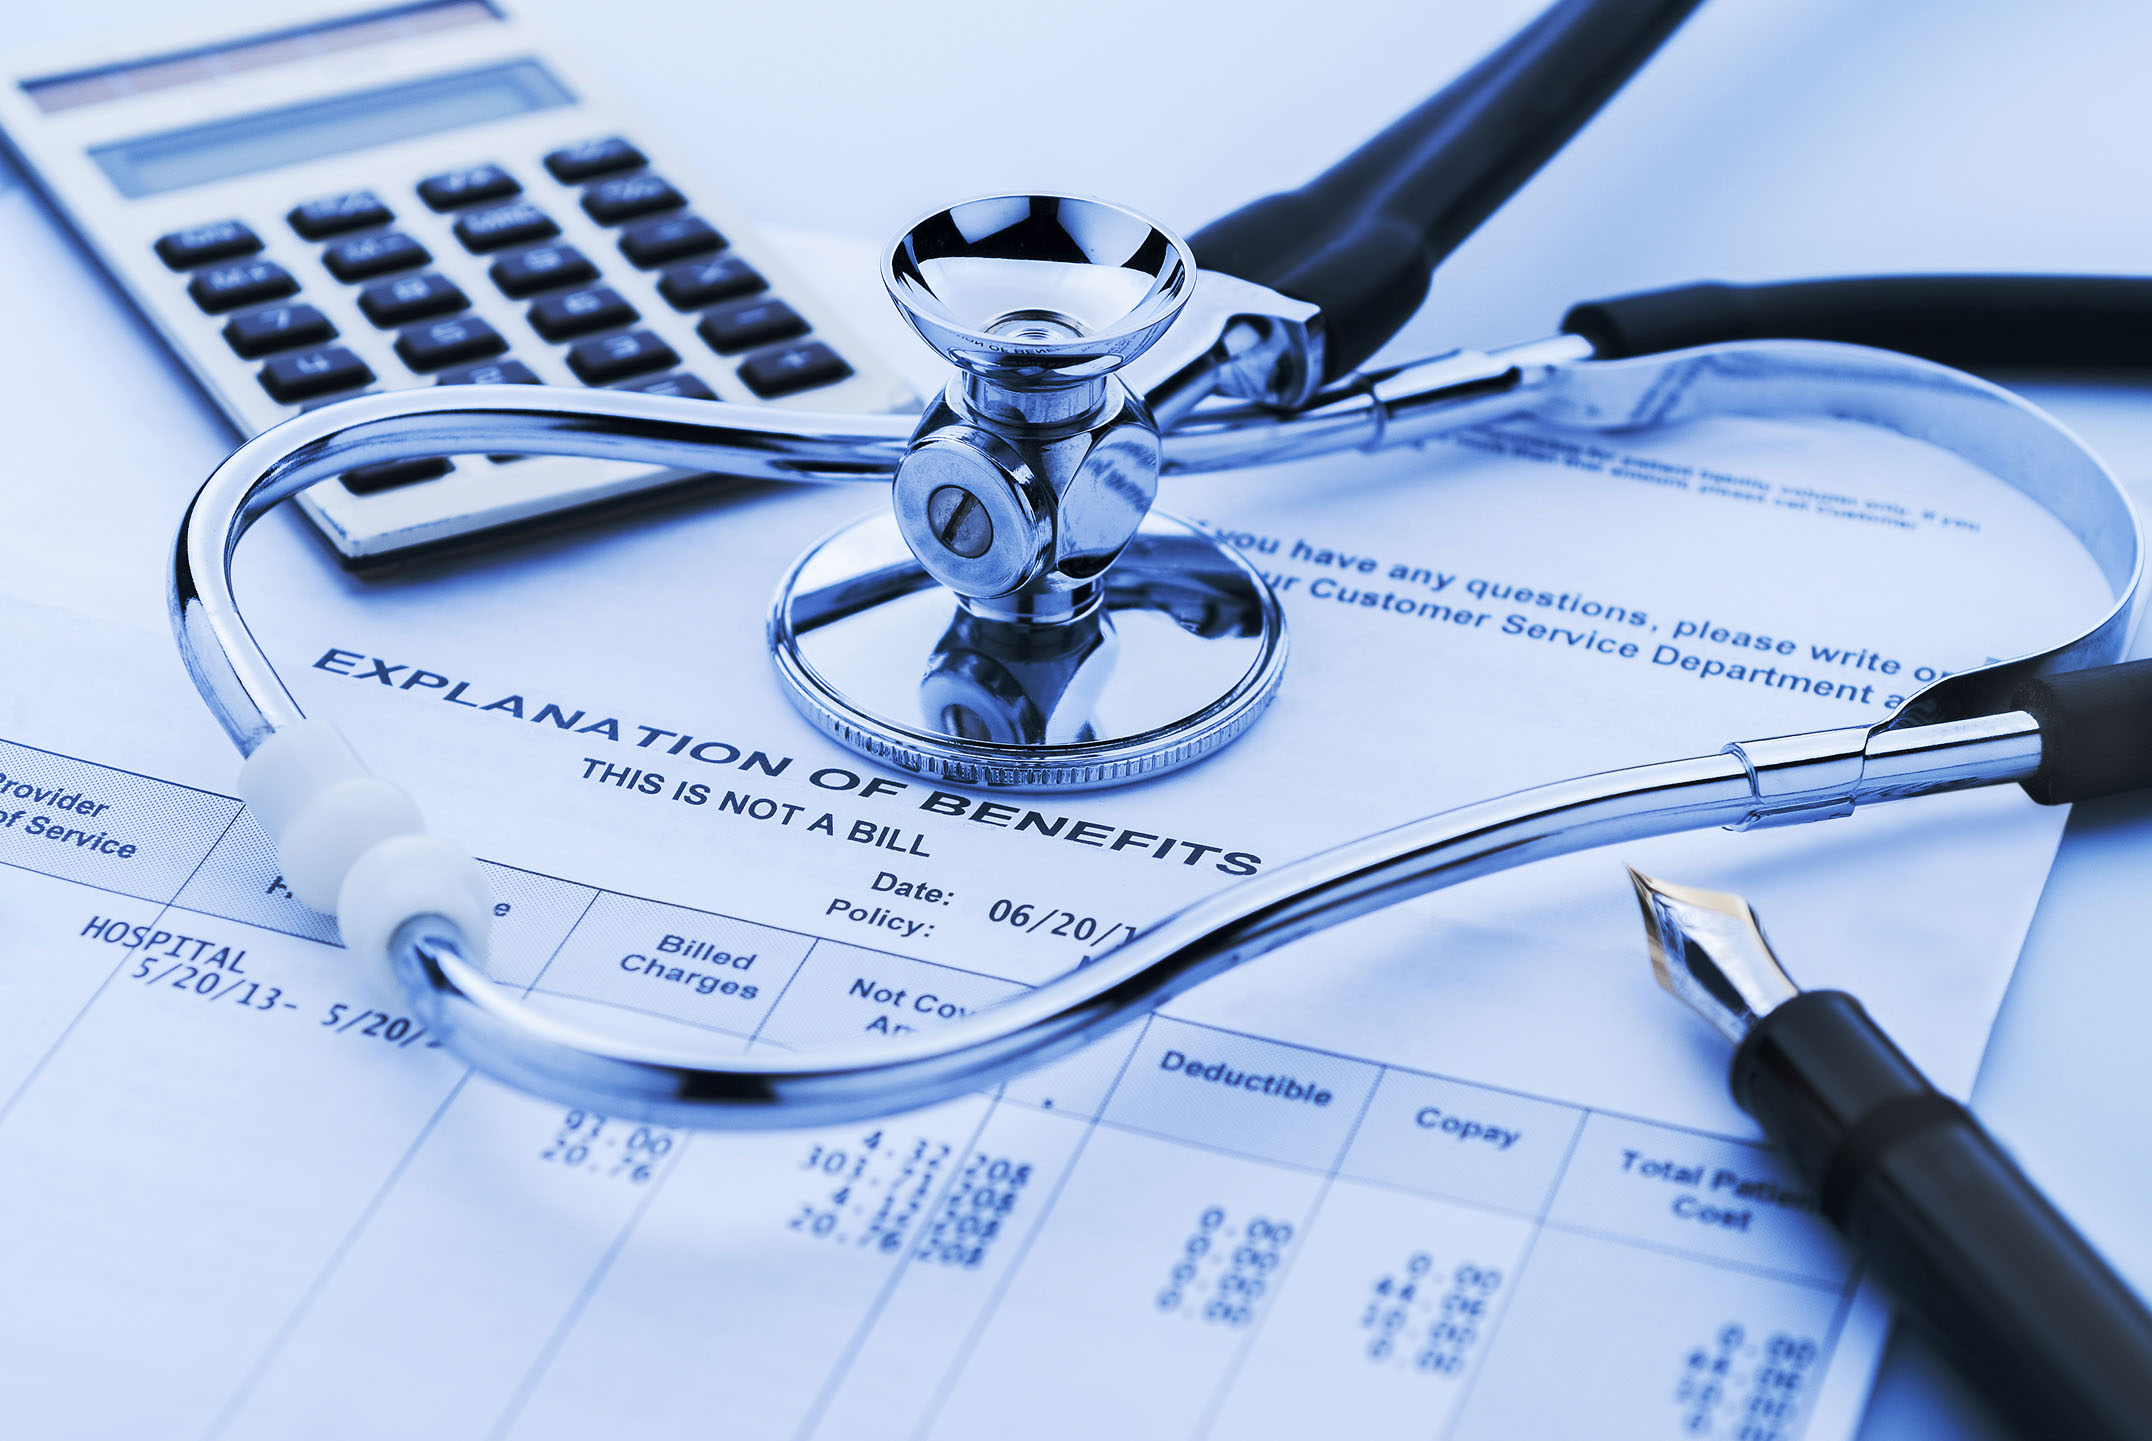 Seven Simple Tips To Save Money On Health Care Costs